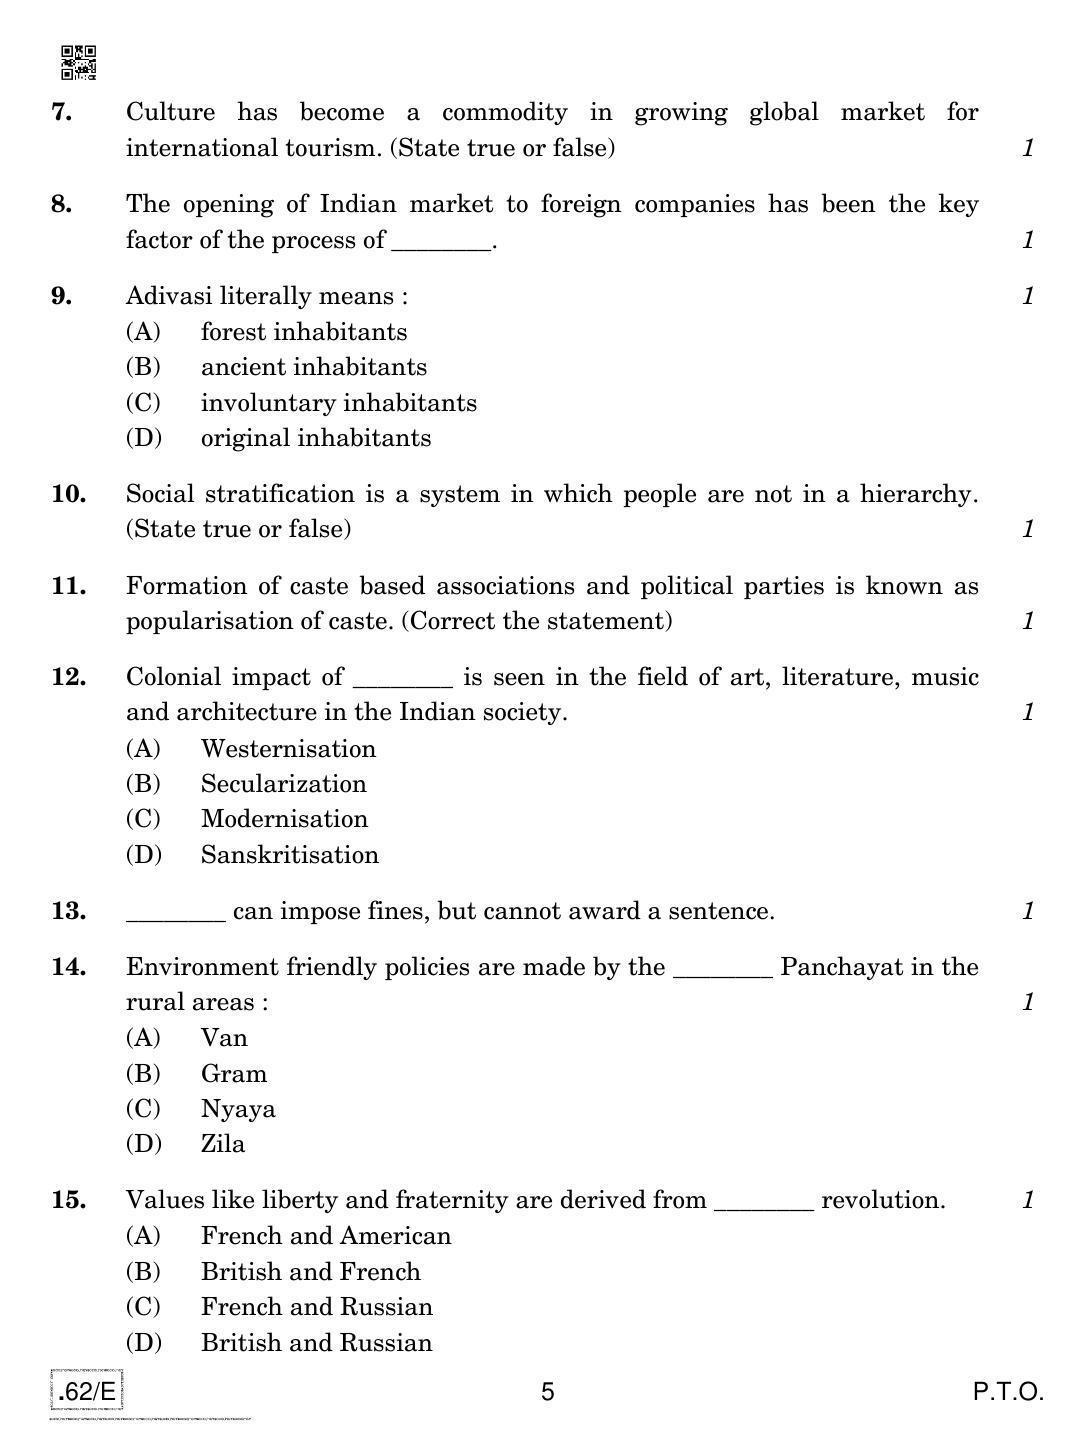 CBSE Class 12 Sociology 2020 Compartment Question Paper - Page 5